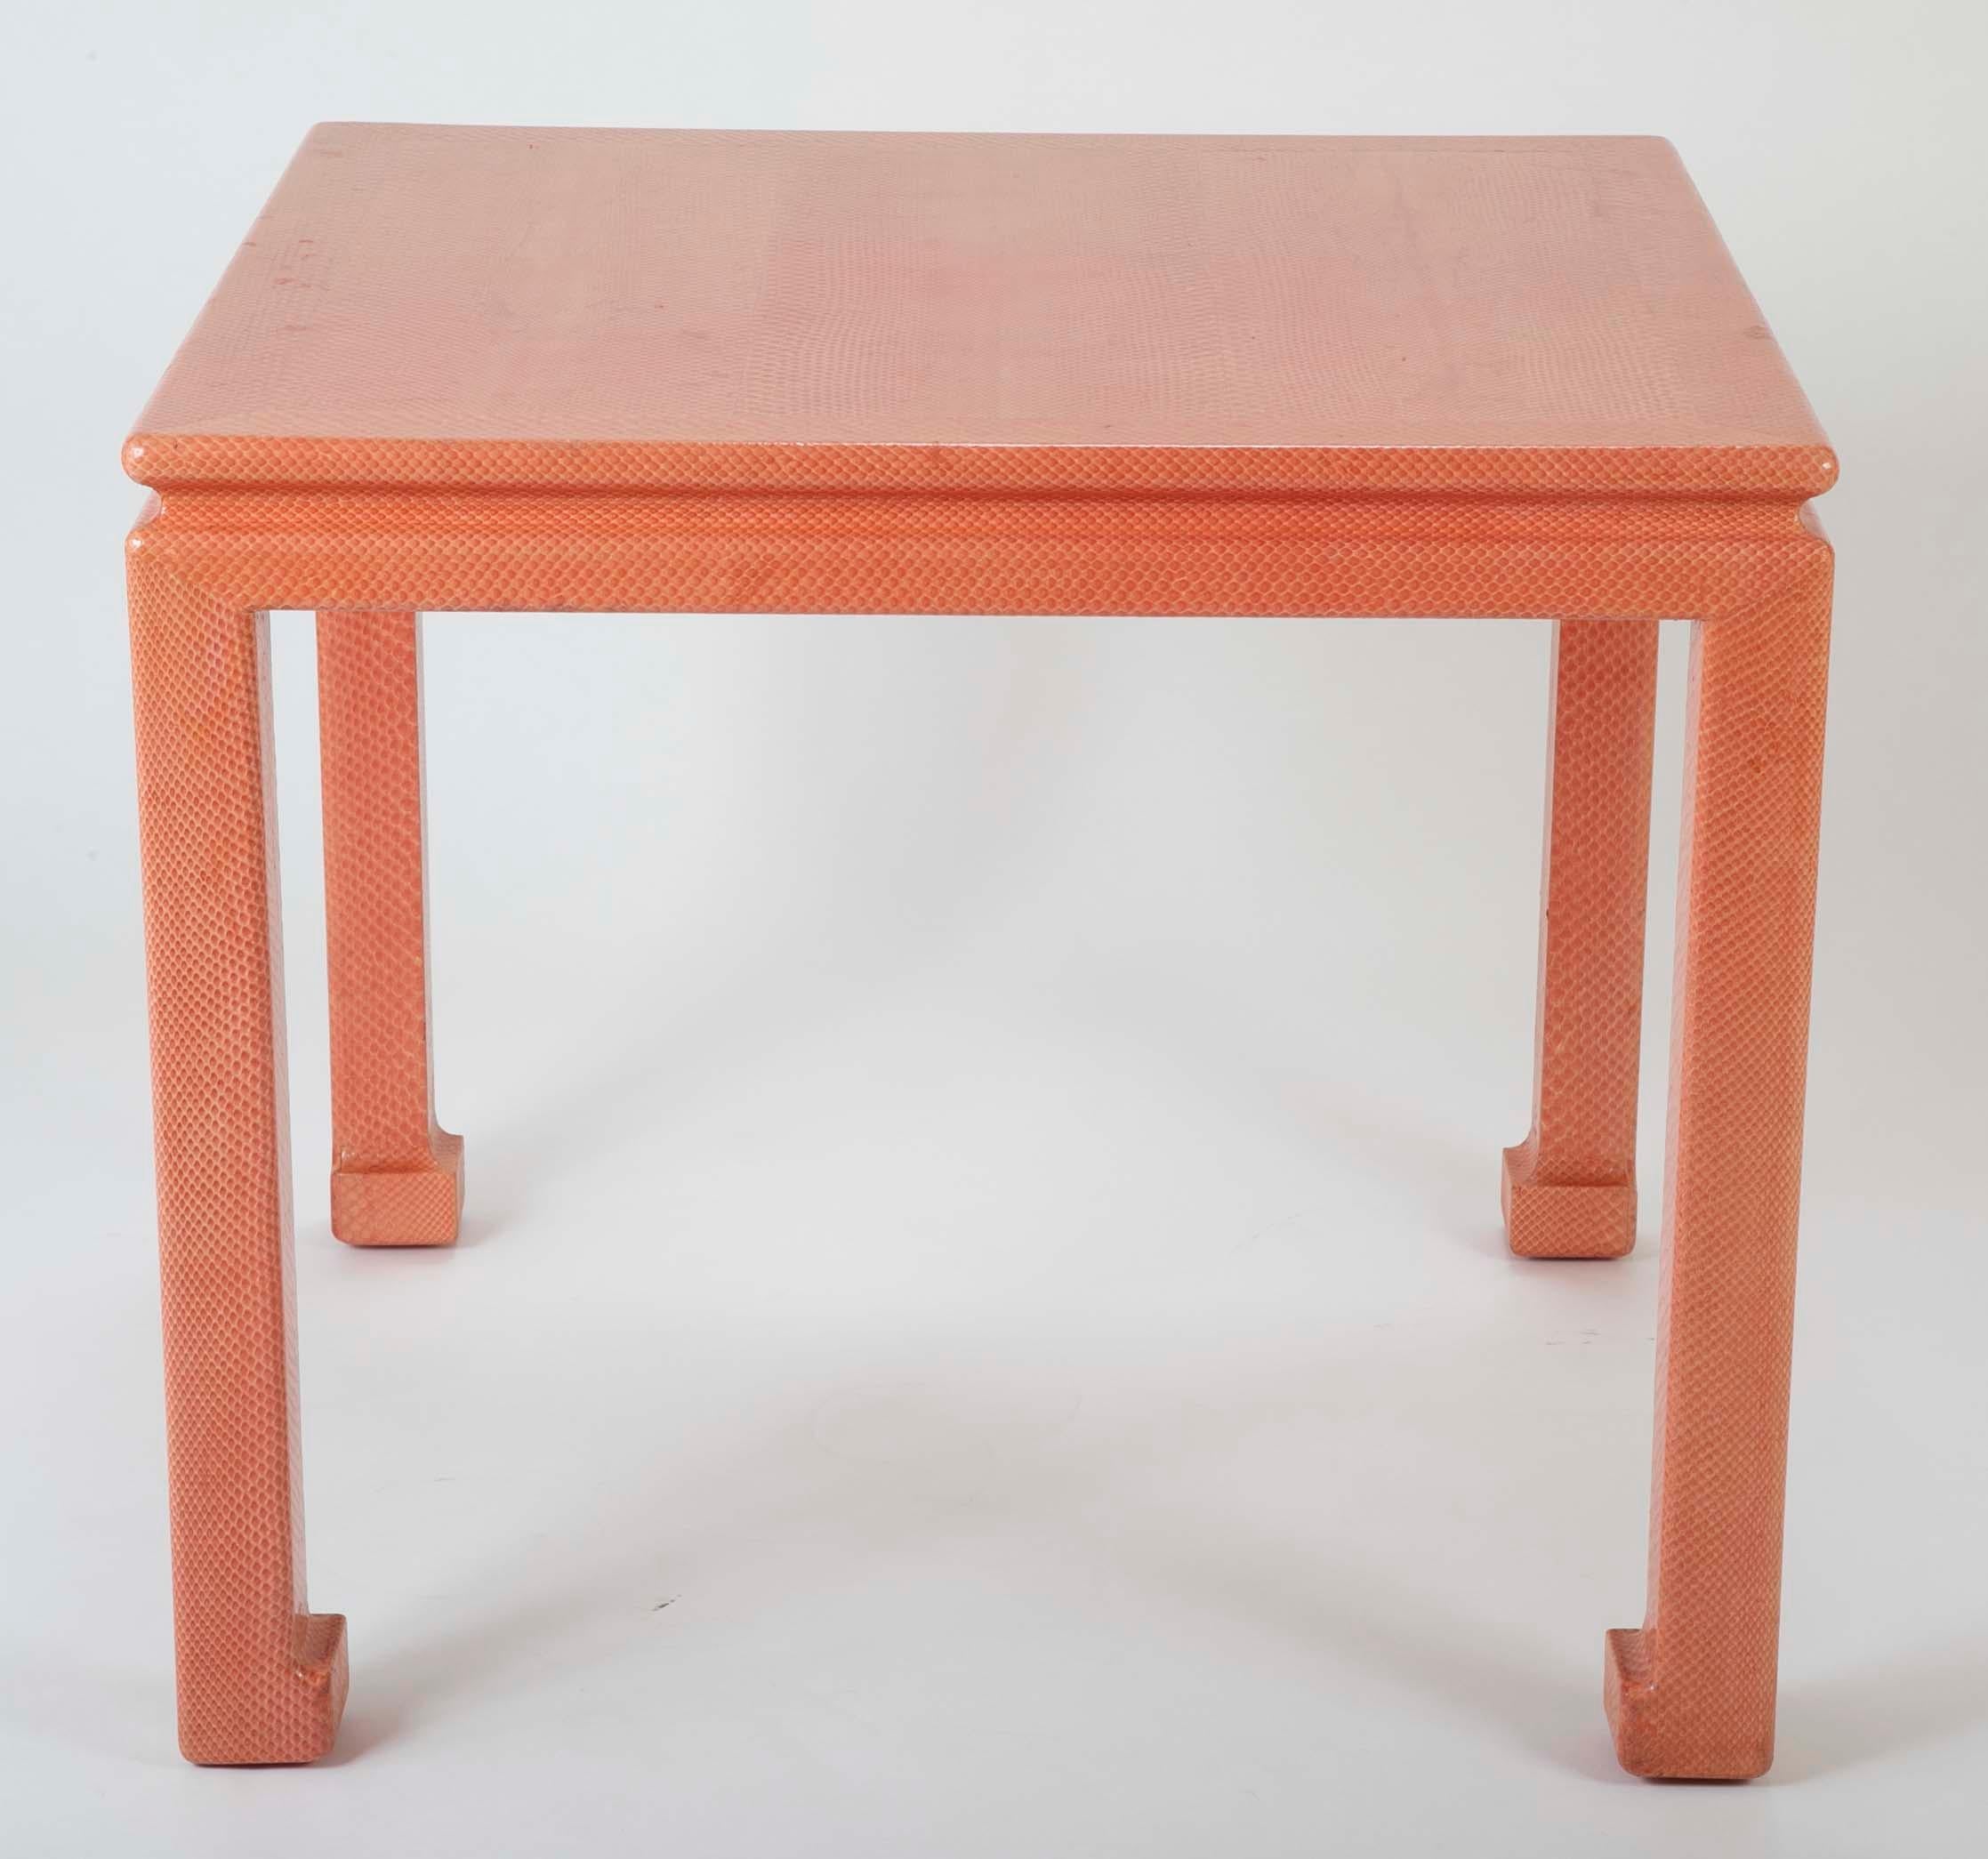 A Karl Springer games table with leather label on underside. Covered in coral colored snakeskin.